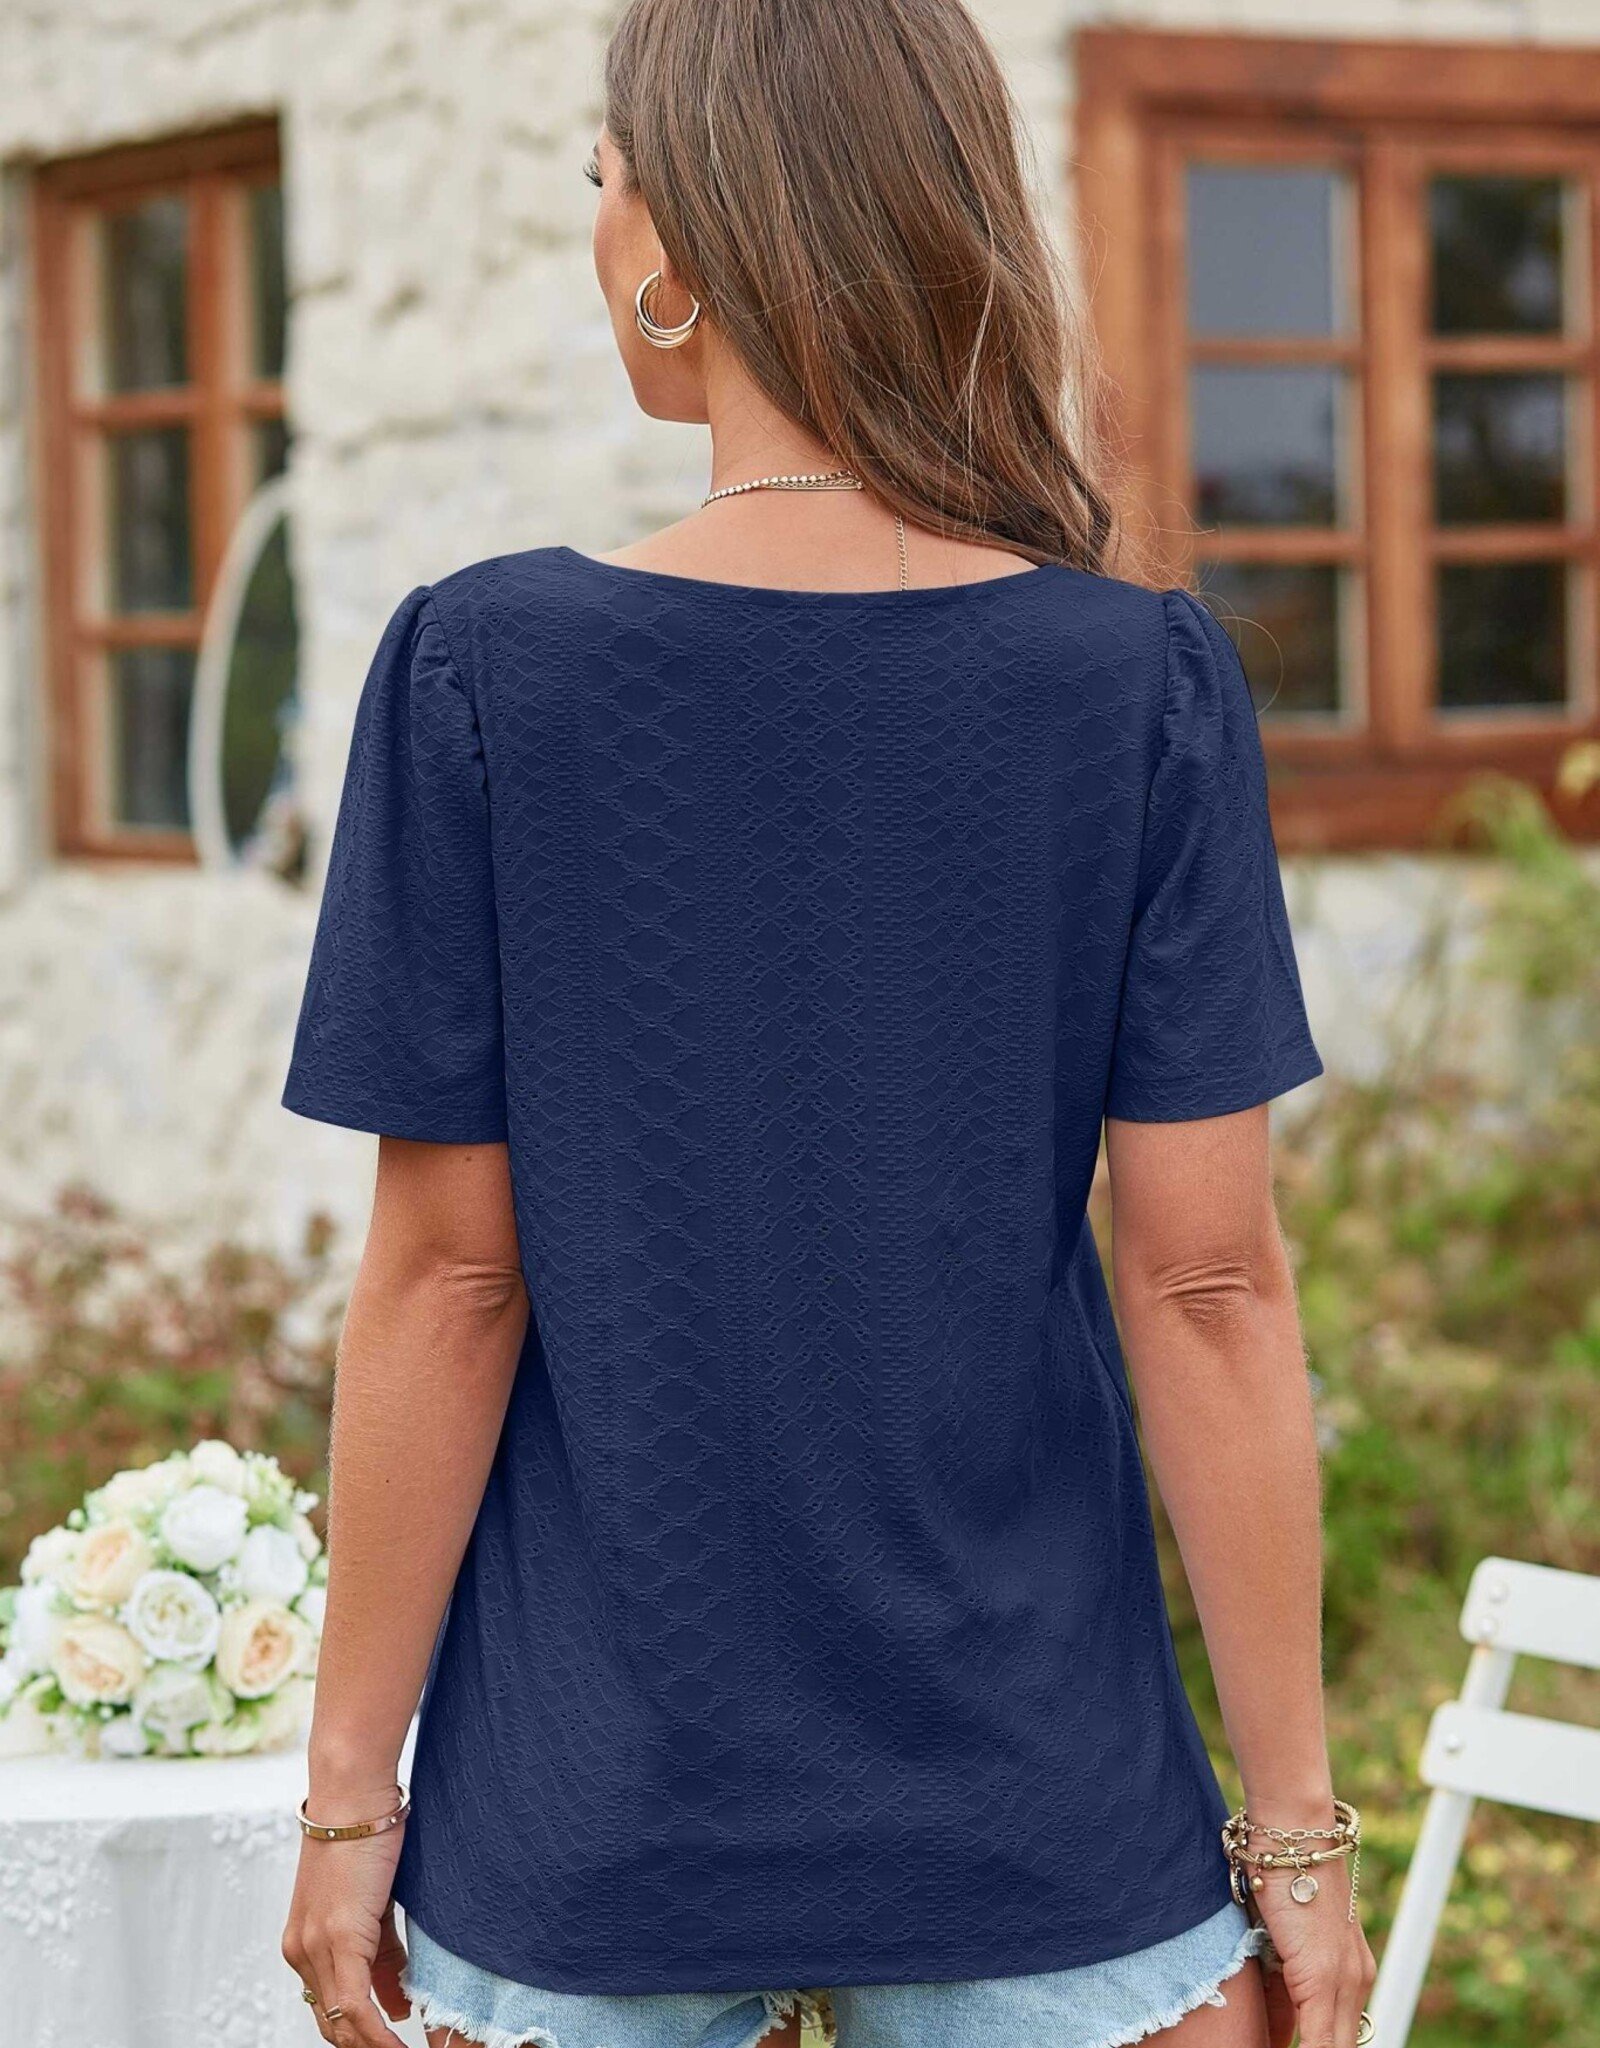 - Navy Blue Lace Textured Square Neck Short Sleeve Top